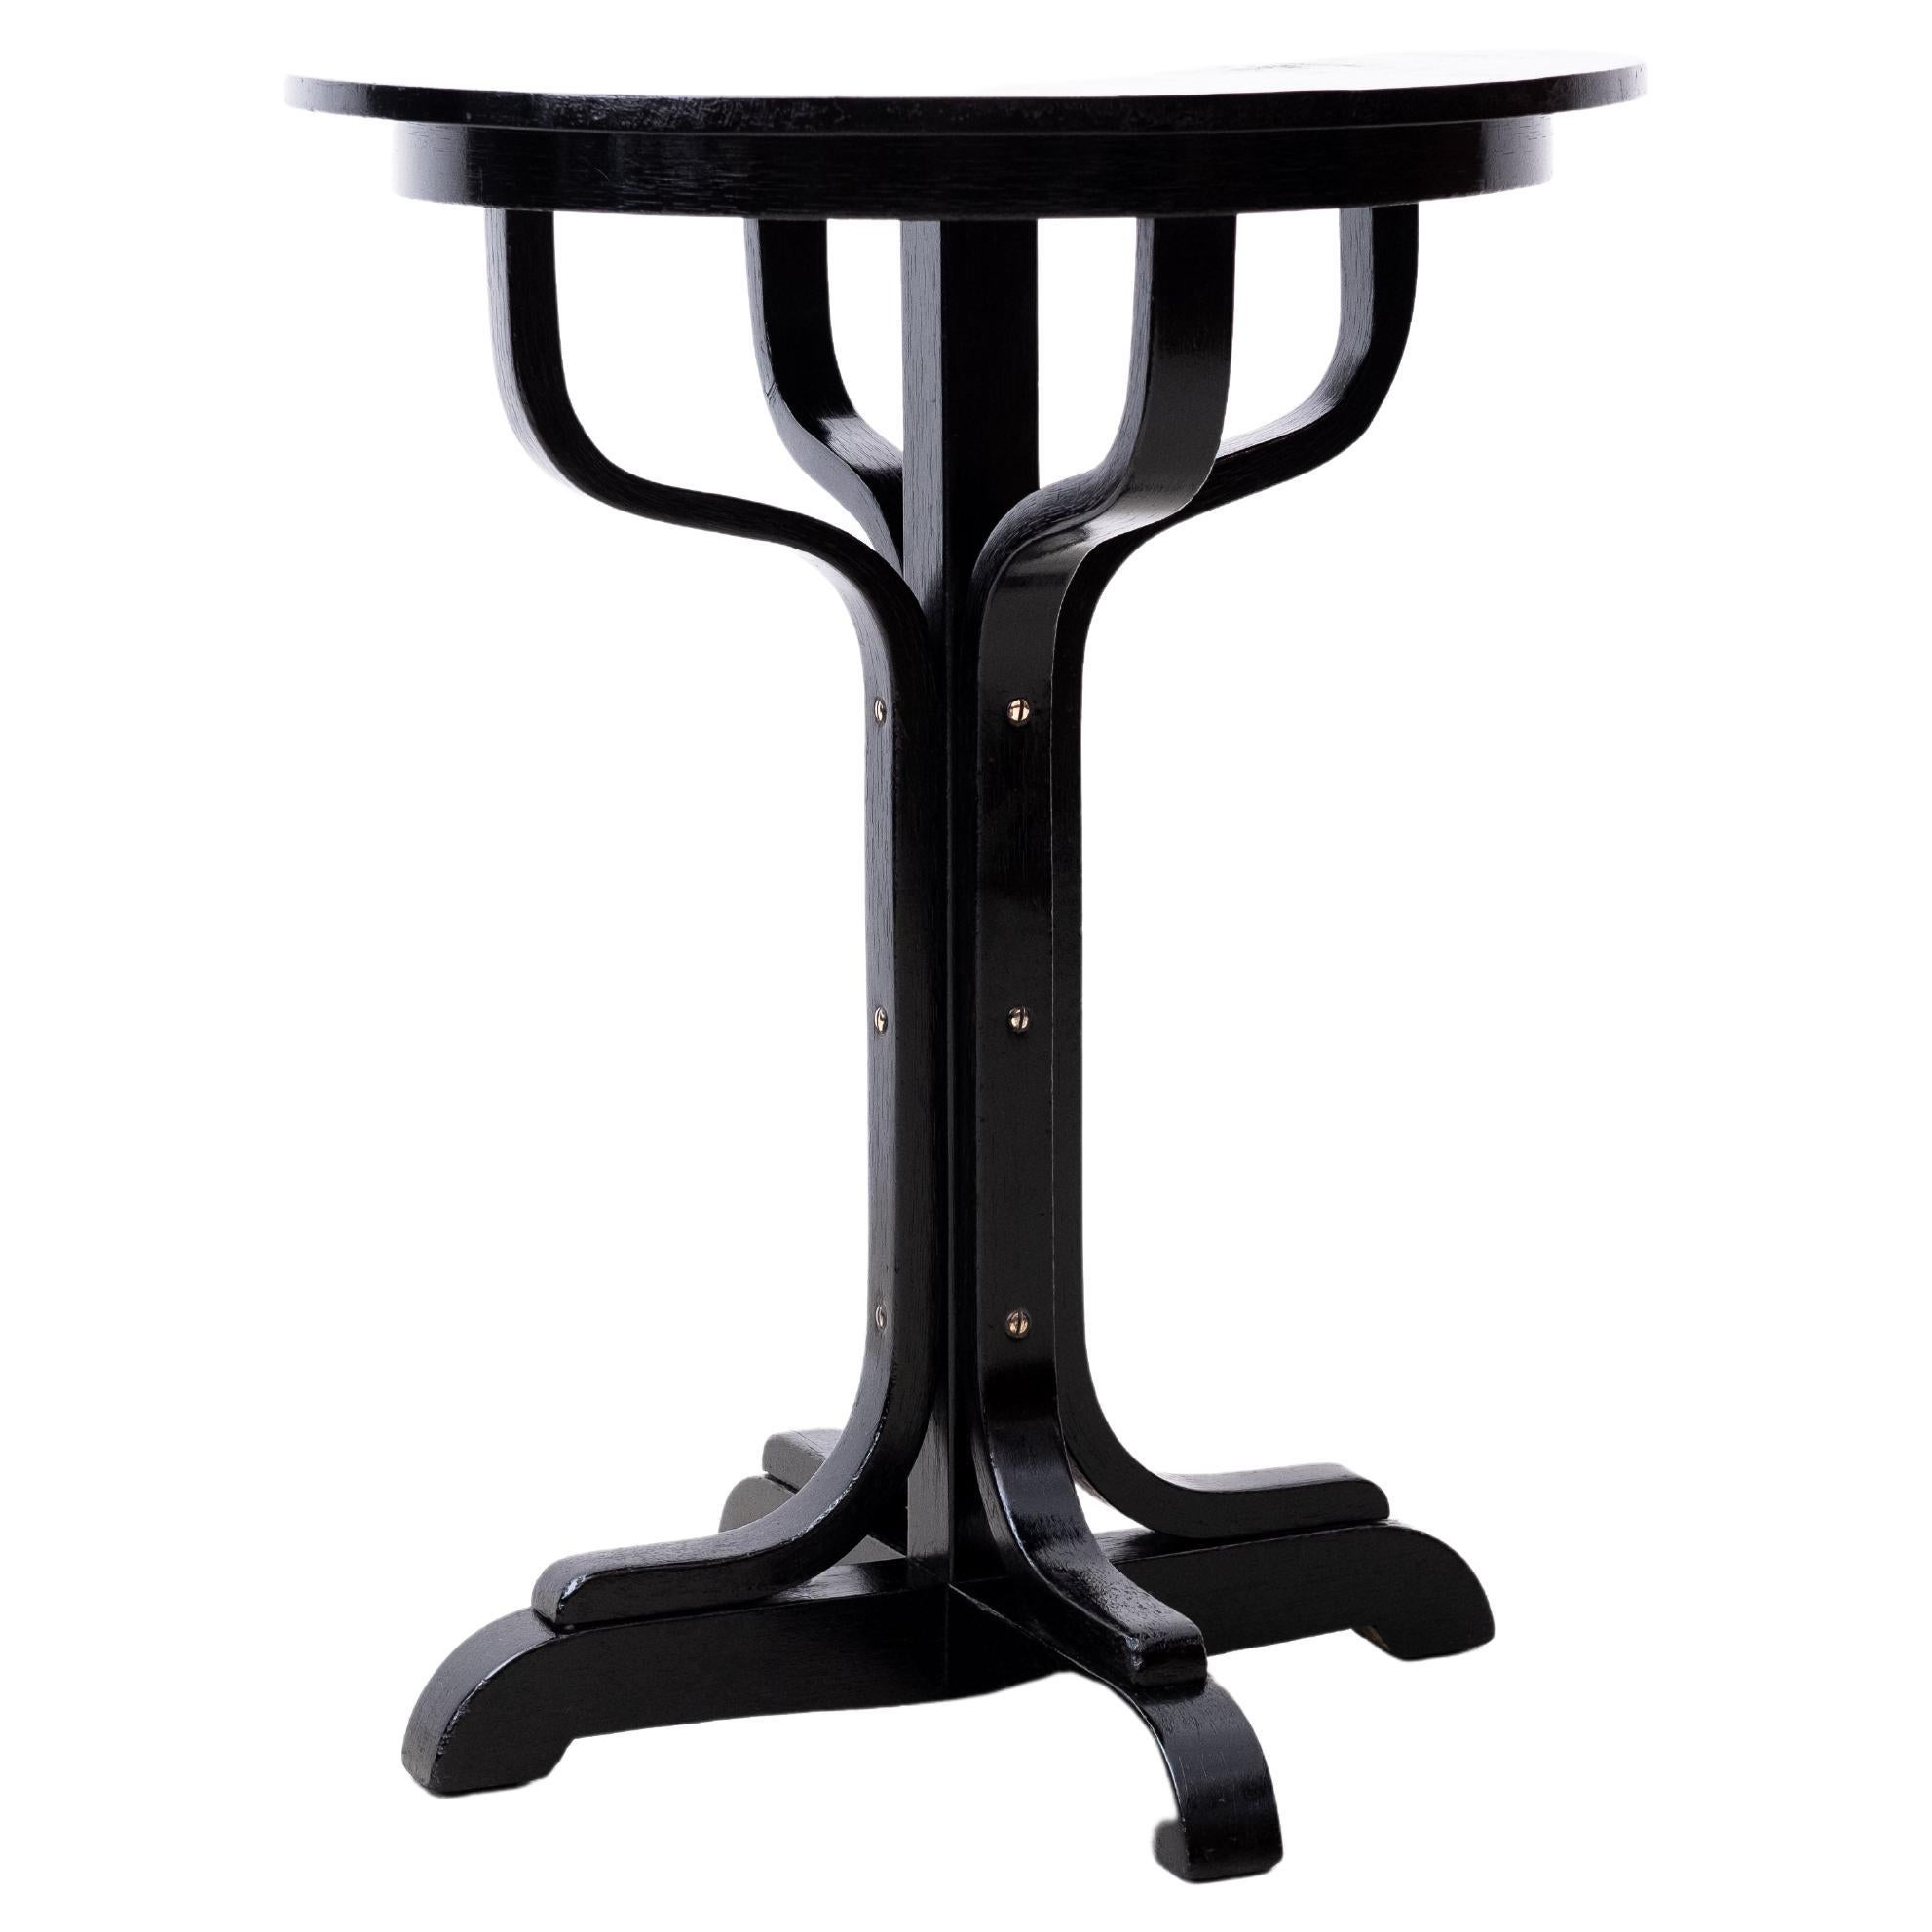 Table d'appoint Art Nouveau, Otto Wagner pour Thonet Brothers, Type 8024 (Vienna, 1905)